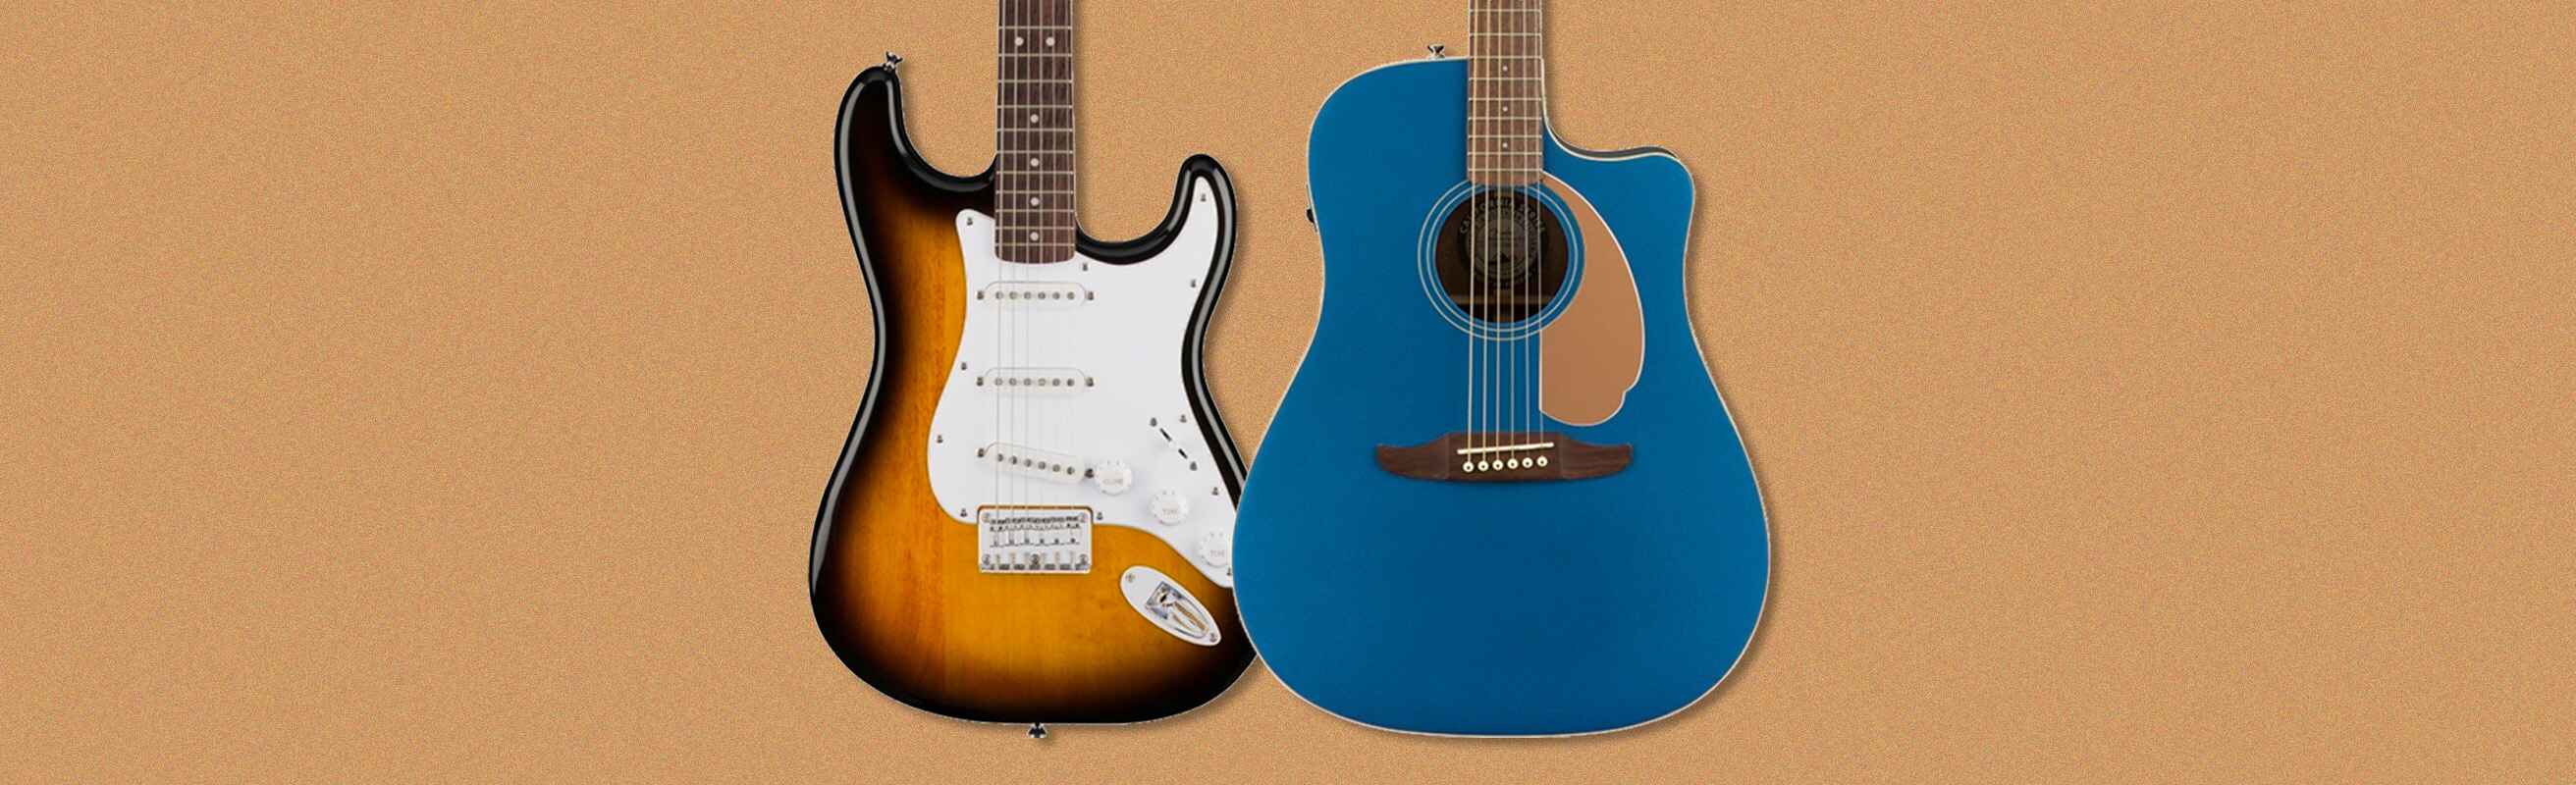 What Is The Difference Between An Electric Guitar And An Acoustic Guitar